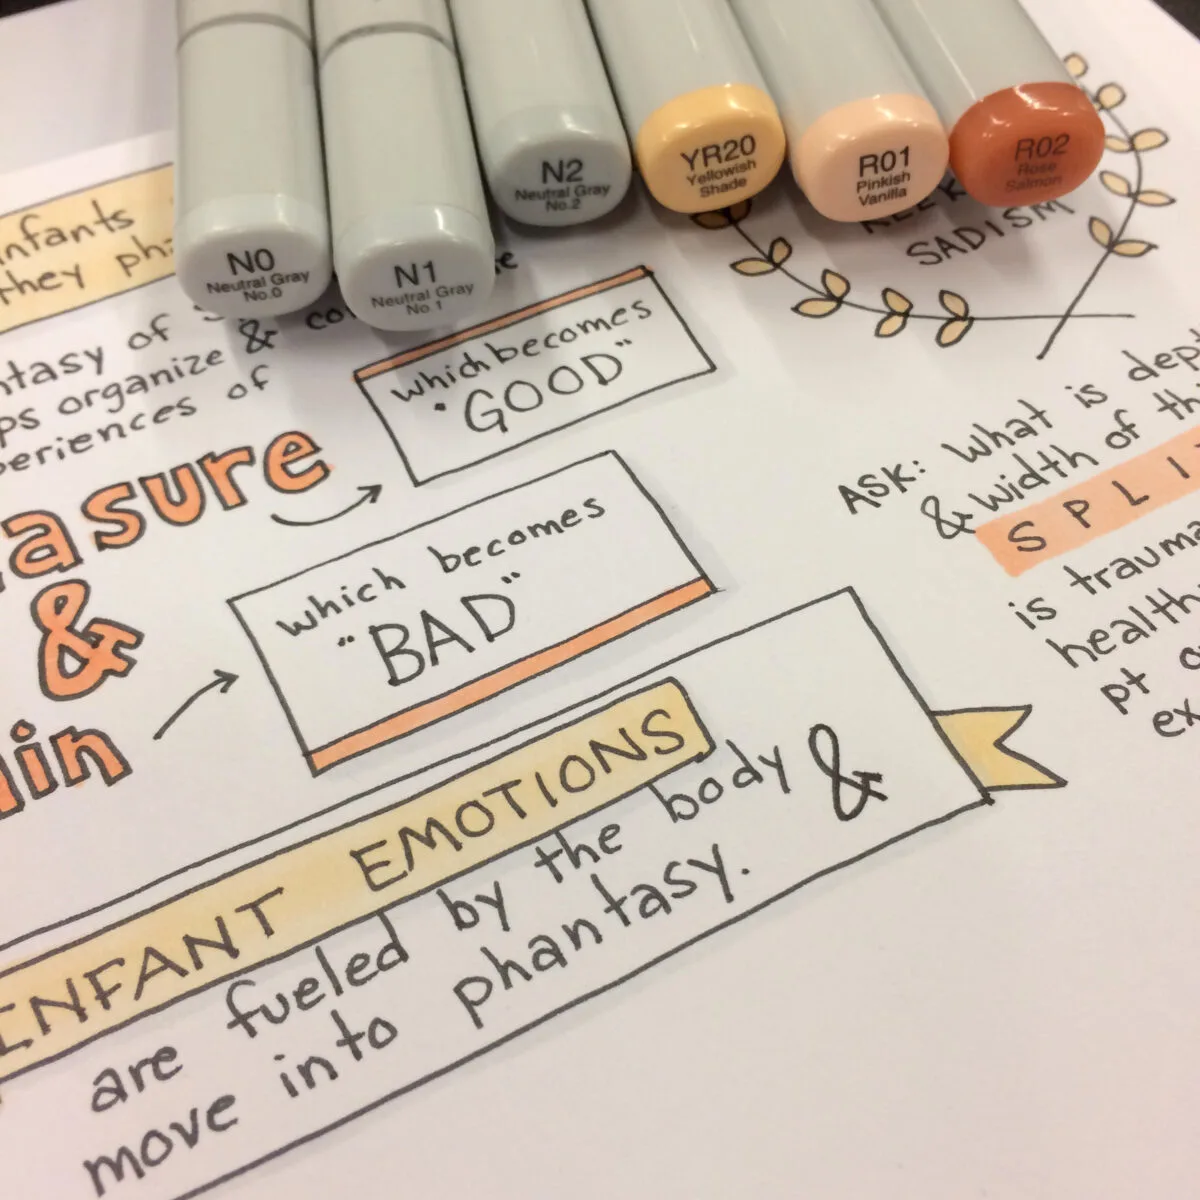 A page of cute notes with copic markers used to make it.